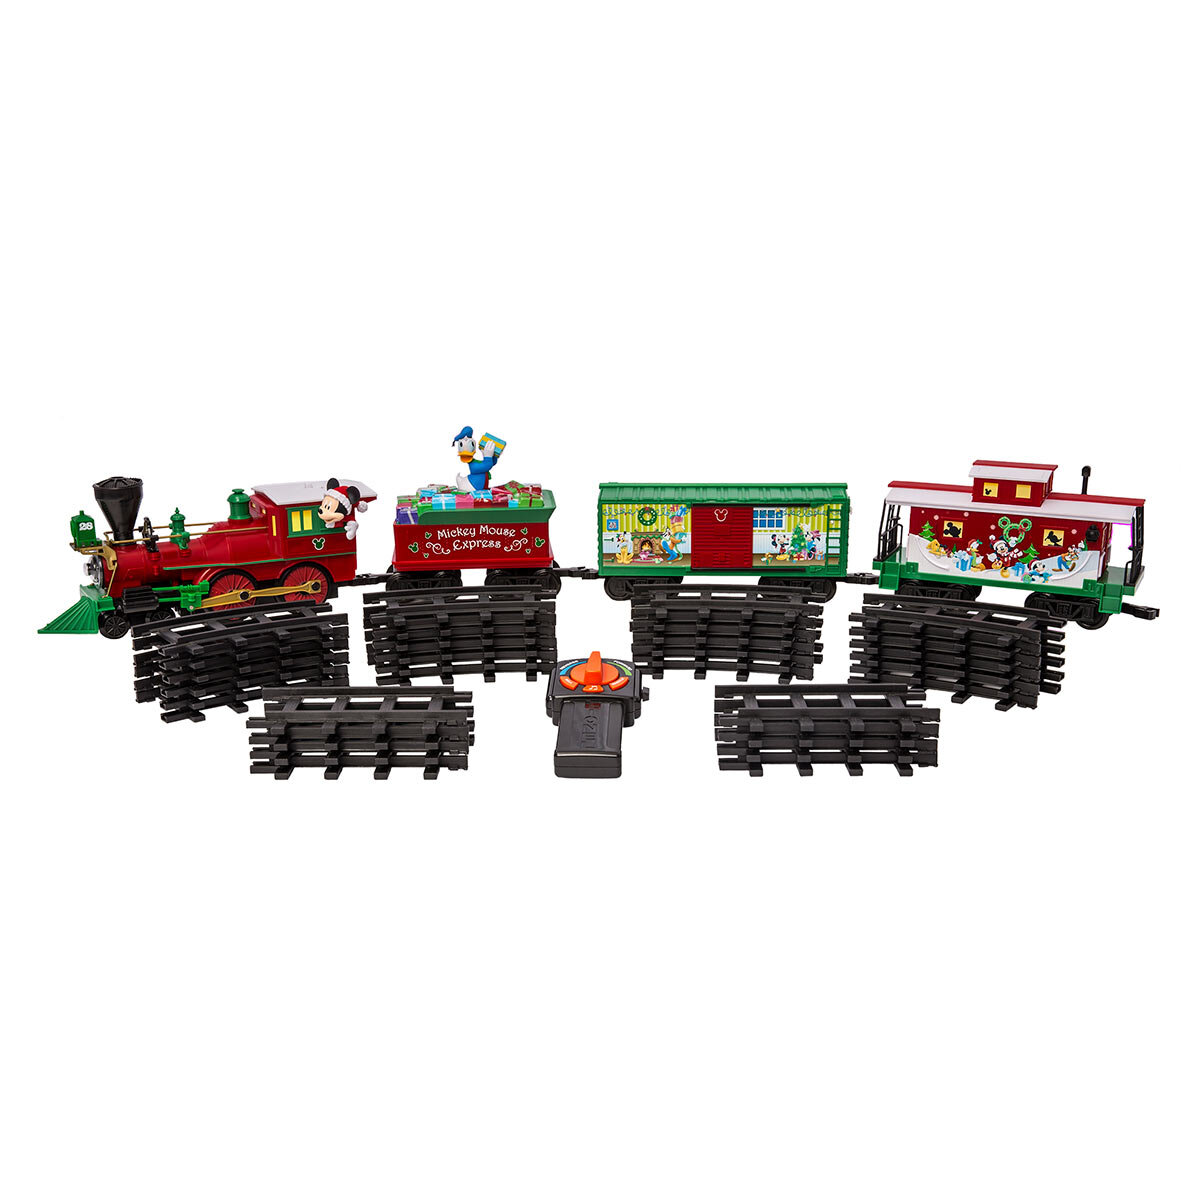 Buy Mickey Mouse Train Set Included Image at Costco.co.uk